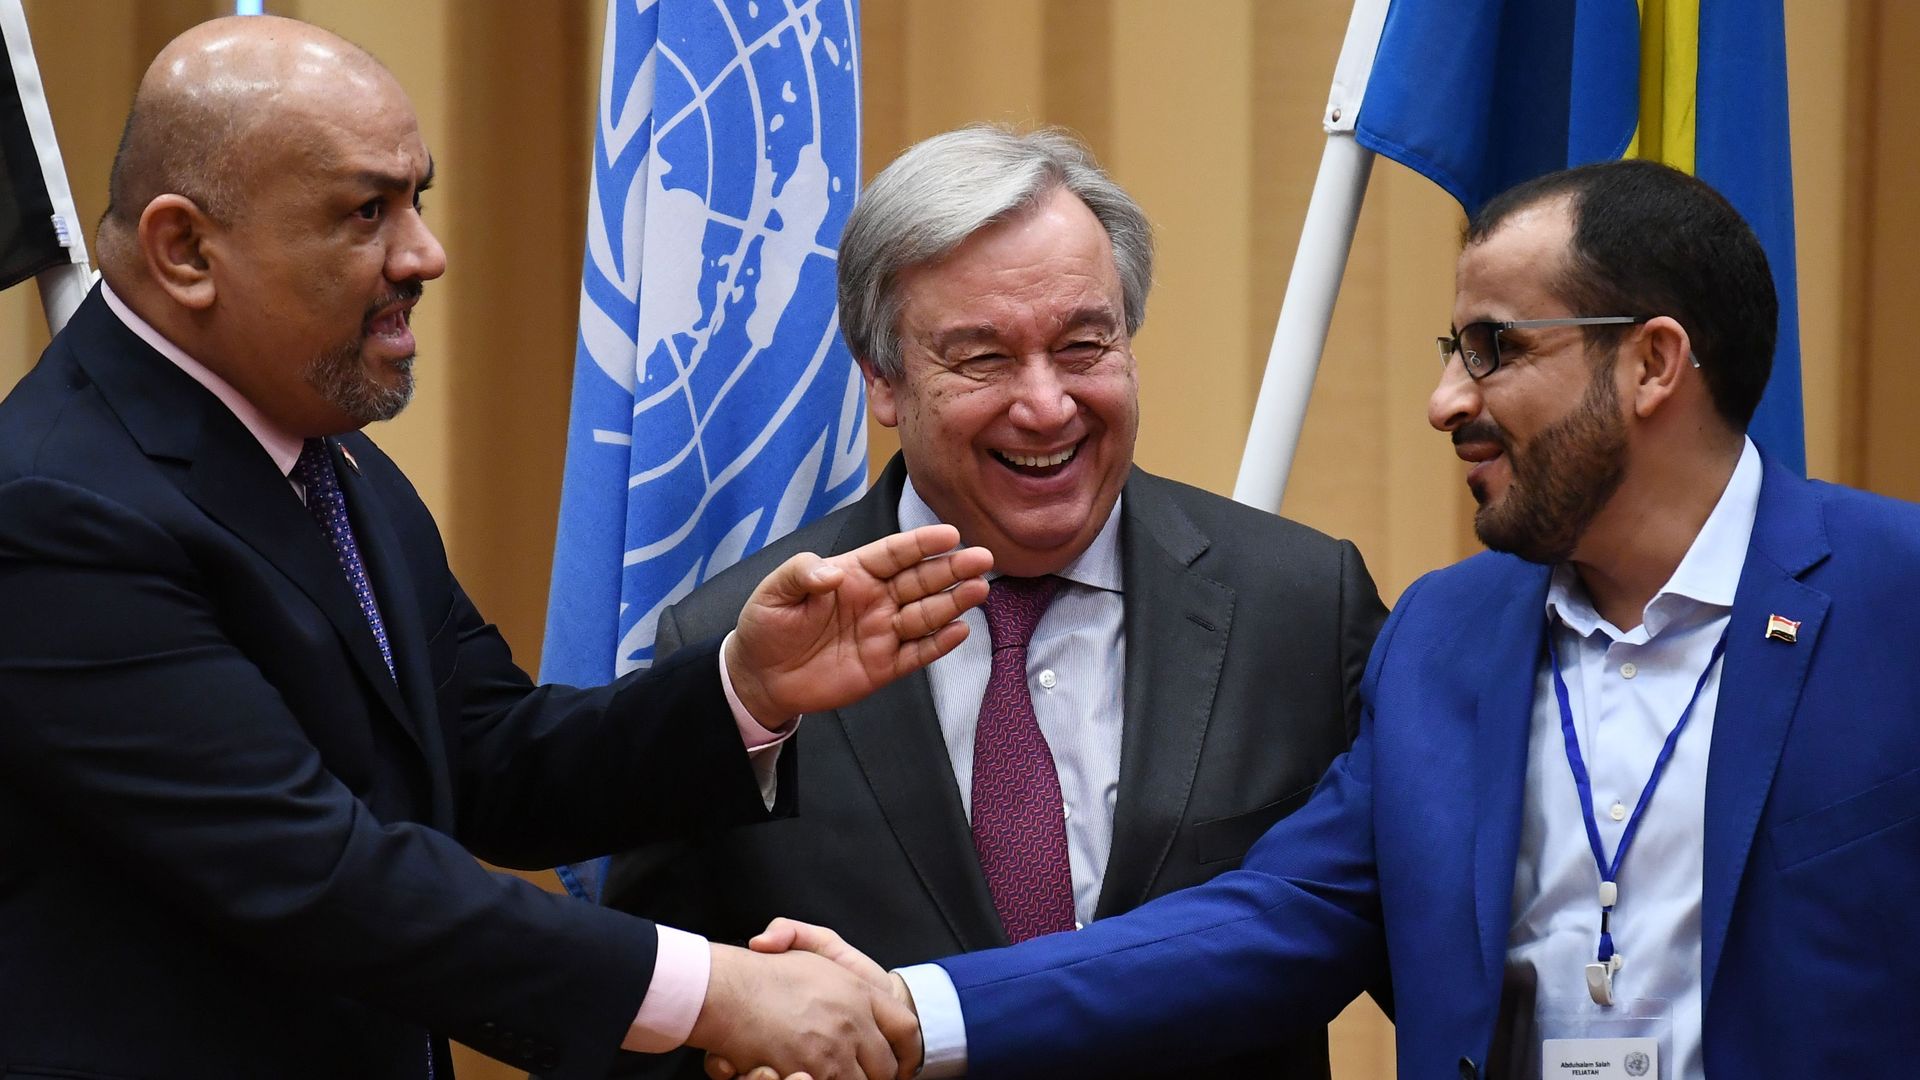 Yemen's foreign minister Khaled al-Yamani (L) and rebel negotiator Mohammed Abdelsalam (R) shake hands under the eyes of United Nations Secretary General Antonio Guterres during peace consultations 